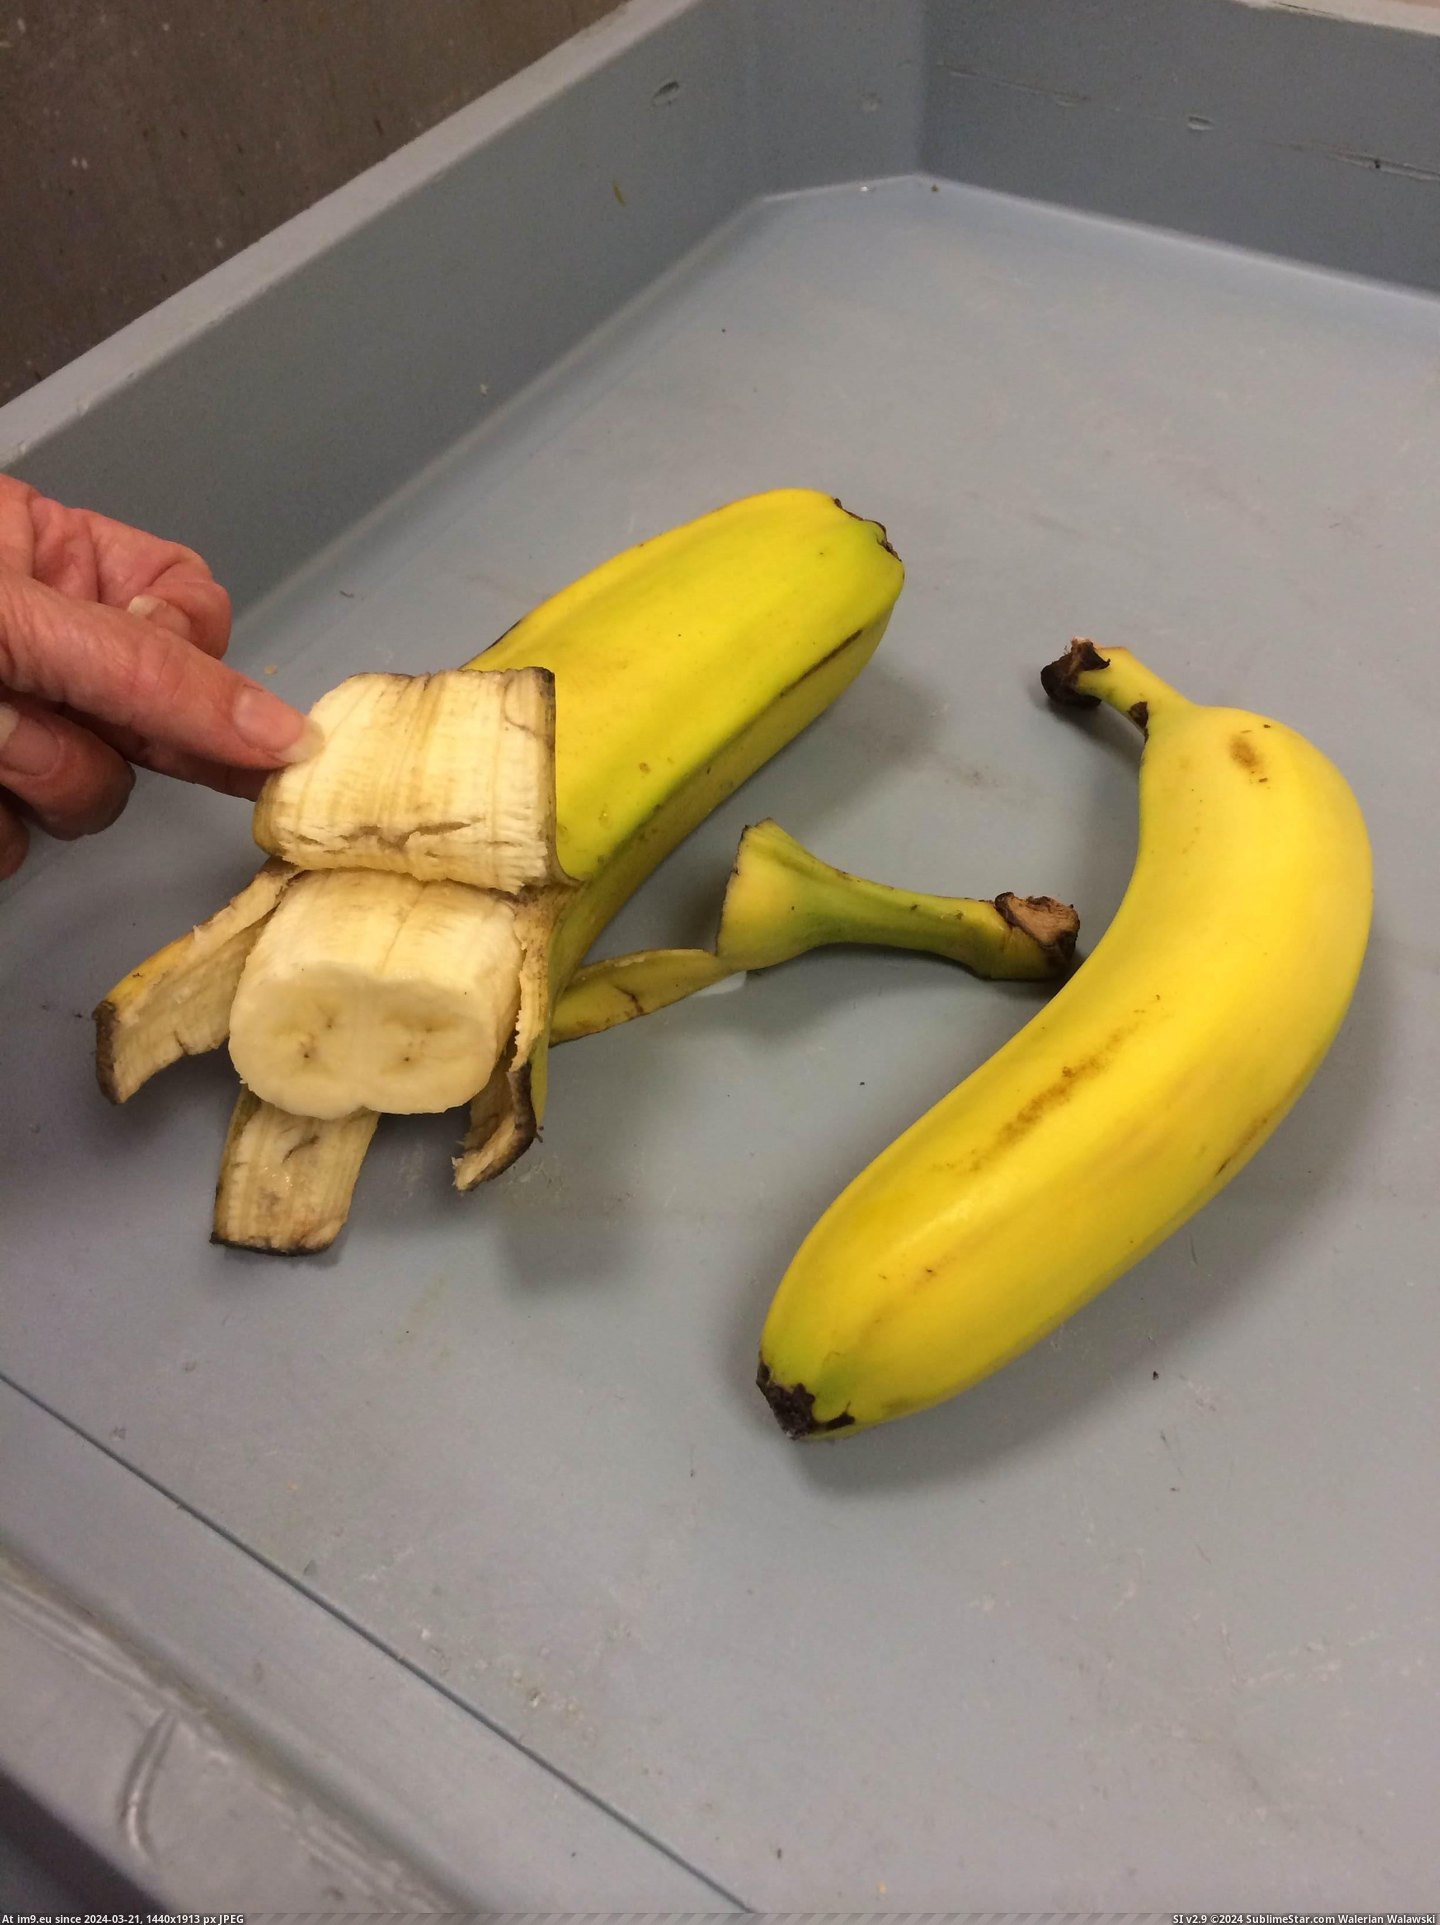 #For #Double #Added #Regular #Scale #Banana [Mildlyinteresting] Double Banana (Regular Banana added for scale) 4 Pic. (Bild von album My r/MILDLYINTERESTING favs))